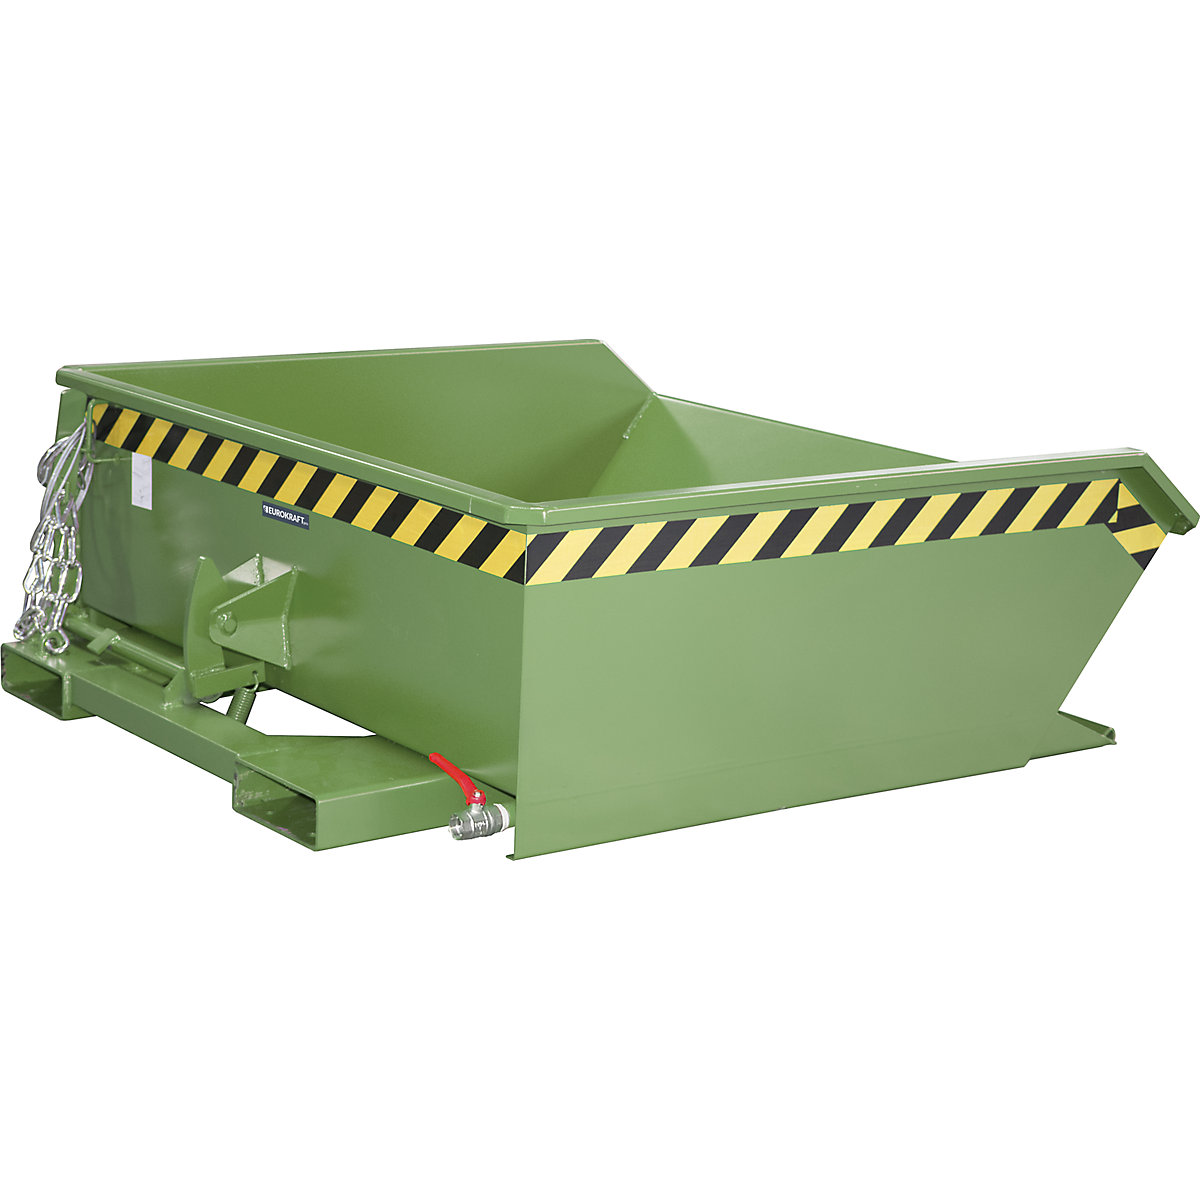 Mini tilting skip for metal swarf – eurokraft pro, low overall height, capacity 0.46 m³, green RAL 6011-4